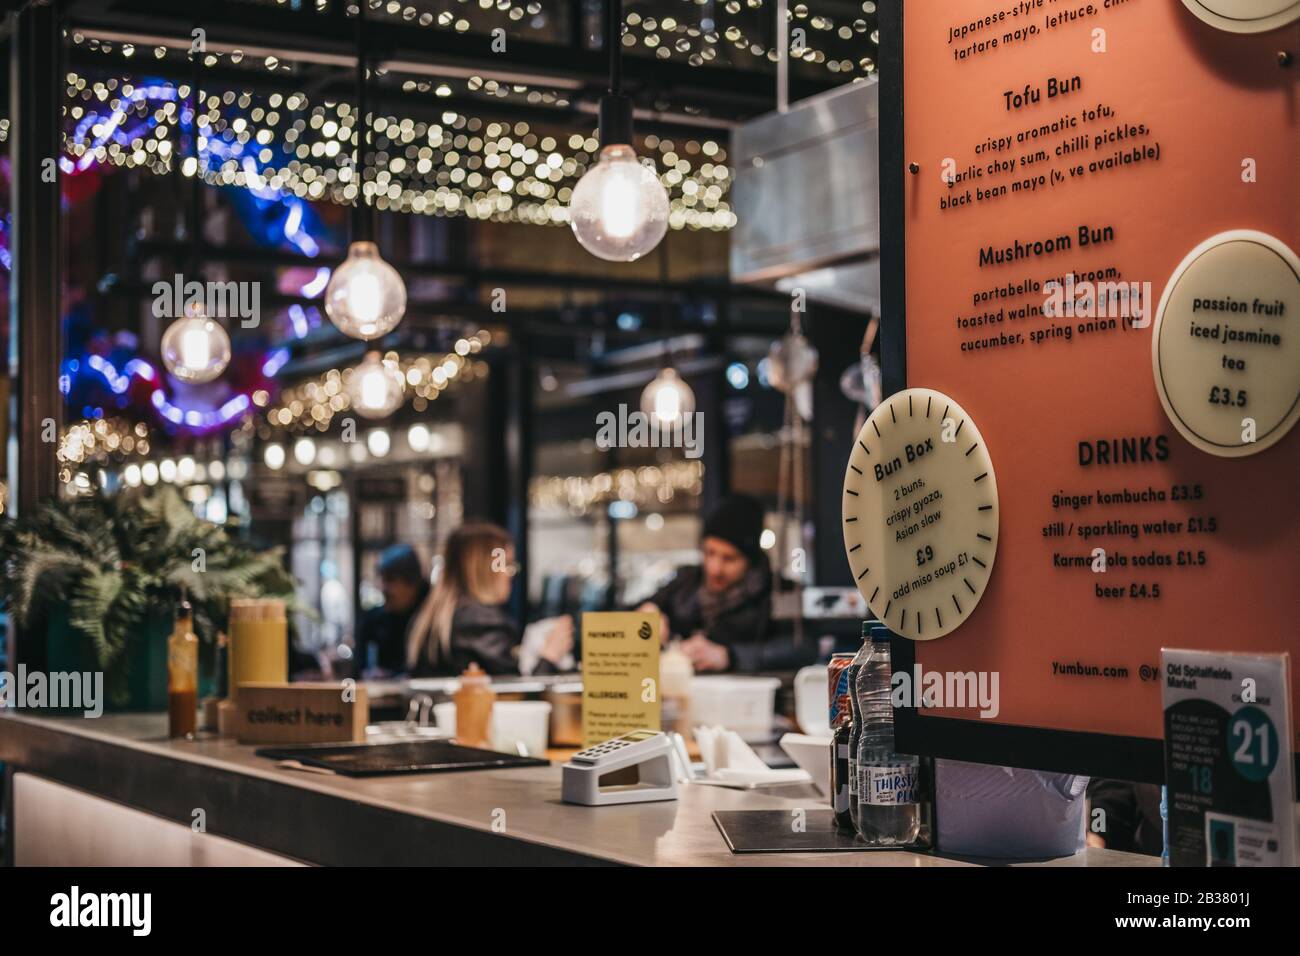 London, UK - December 14, 2019: Menu at a Chinese food stall in Spitalfields Market, one of the finest Victorian Markets in London with stalls offerin Stock Photo